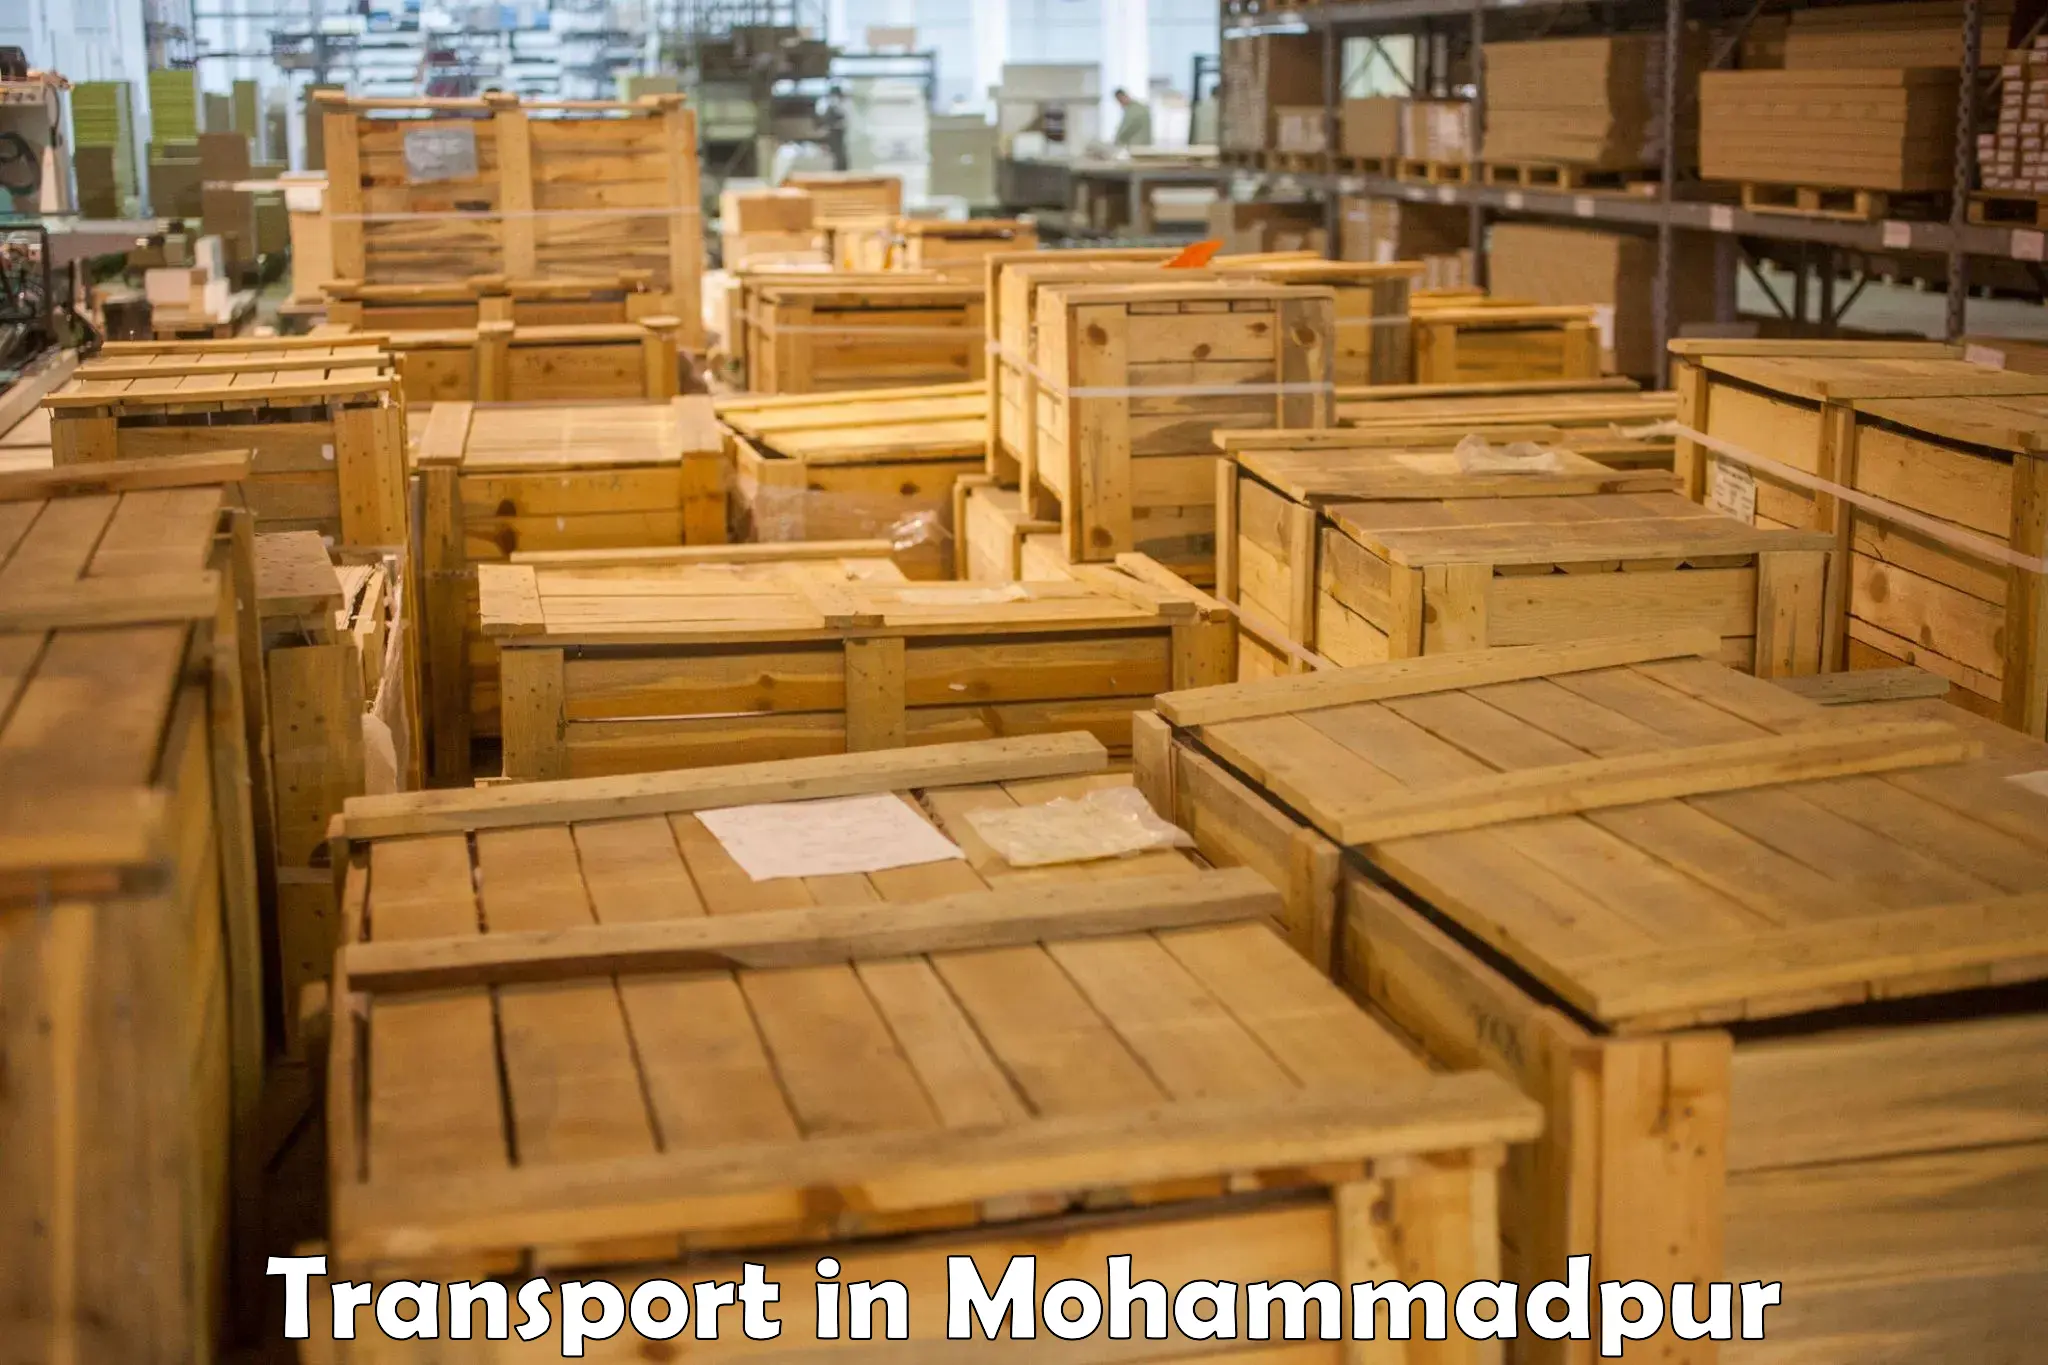 Air cargo transport services in Mohammadpur